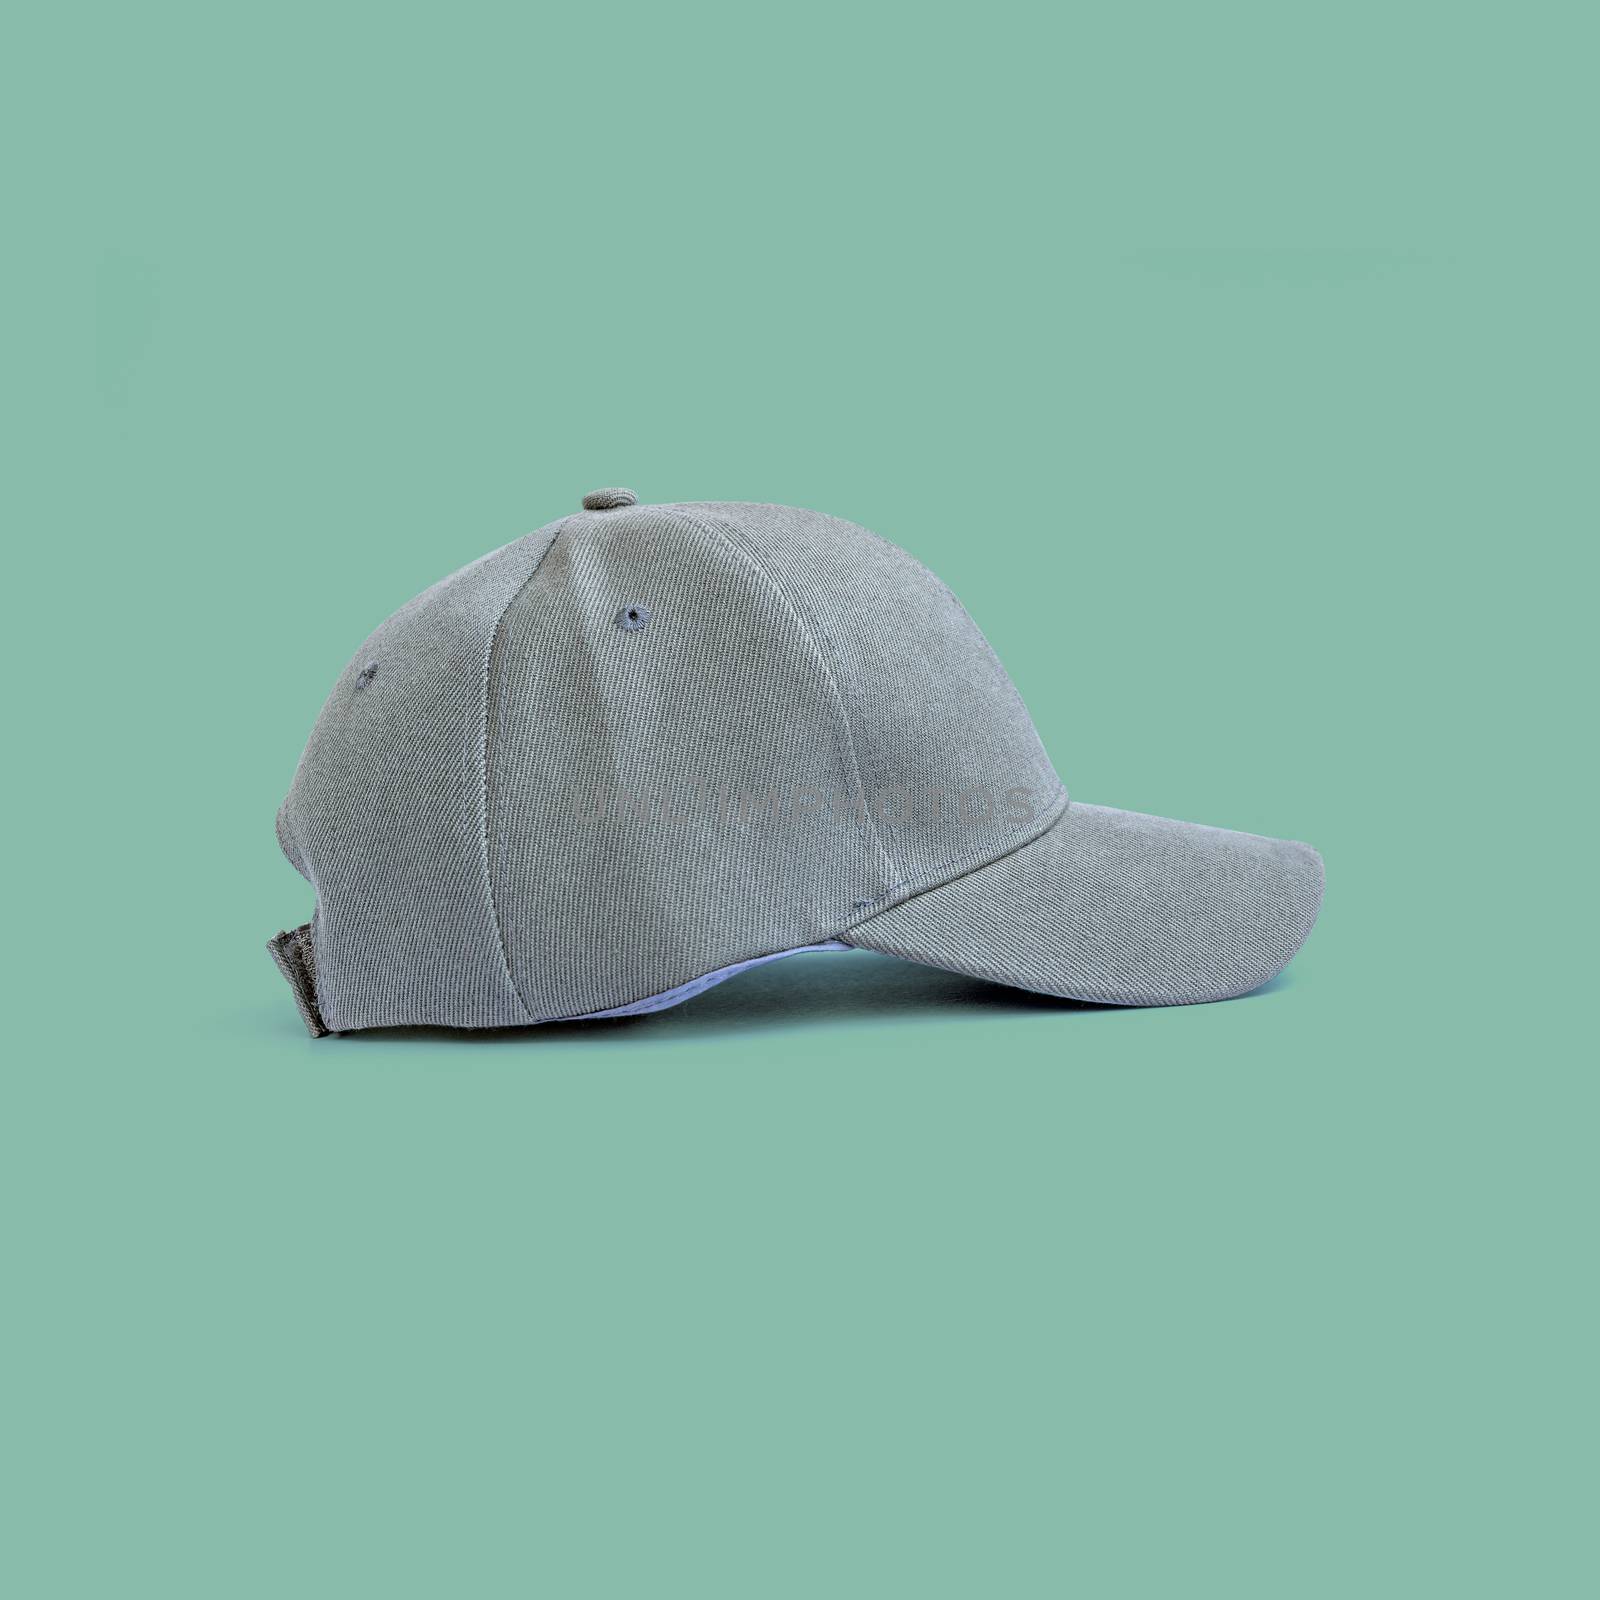 Fashion and sports grey cap isolated on beautiful pastel color background, with clipping path.